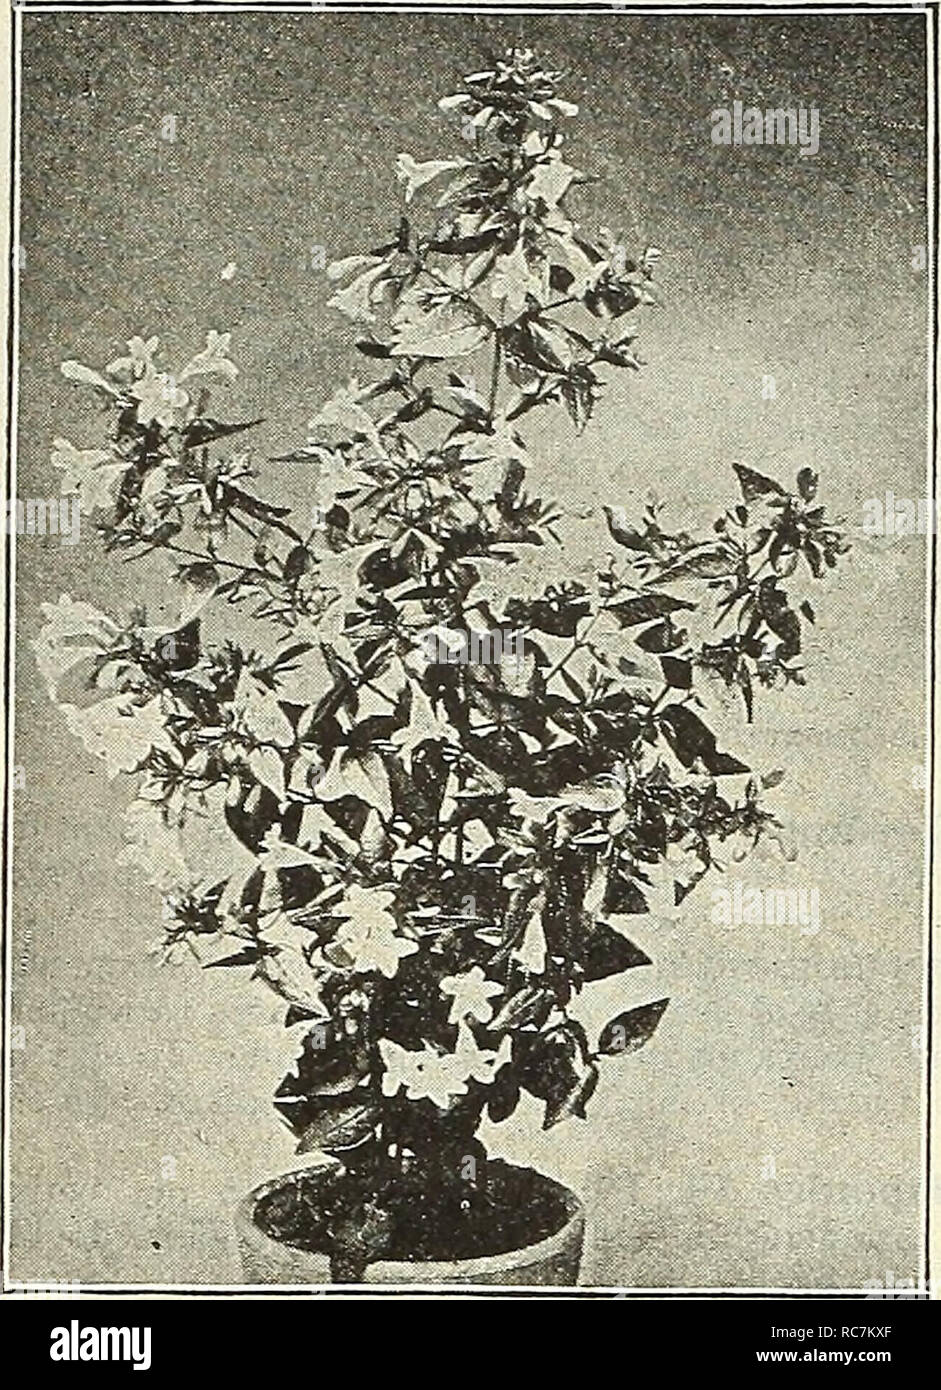 . Dreer's garden calendar : 1903. Seeds Catalogs; Nursery stock Catalogs; Gardening Equipment and supplies Catalogs; Flowers Seeds Catalogs; Vegetables Seeds Catalogs; Fruit Seeds Catalogs. GARDEN AND GREENHOUSE. Abelia Floribunda. ACACIA. Armata. A most desirable house plant, succeeding under the same con- ditions as an Azalea or Camellia ; the bright canary-yellow globular flowers are produced in March and April; very effective. 50 cts. and §1.00 each. ACHIMENES. Tropical plants for summer blooming; [ the scaly tubers must be preserved en- tirely dry during the winter. In early spring pot in Stock Photo